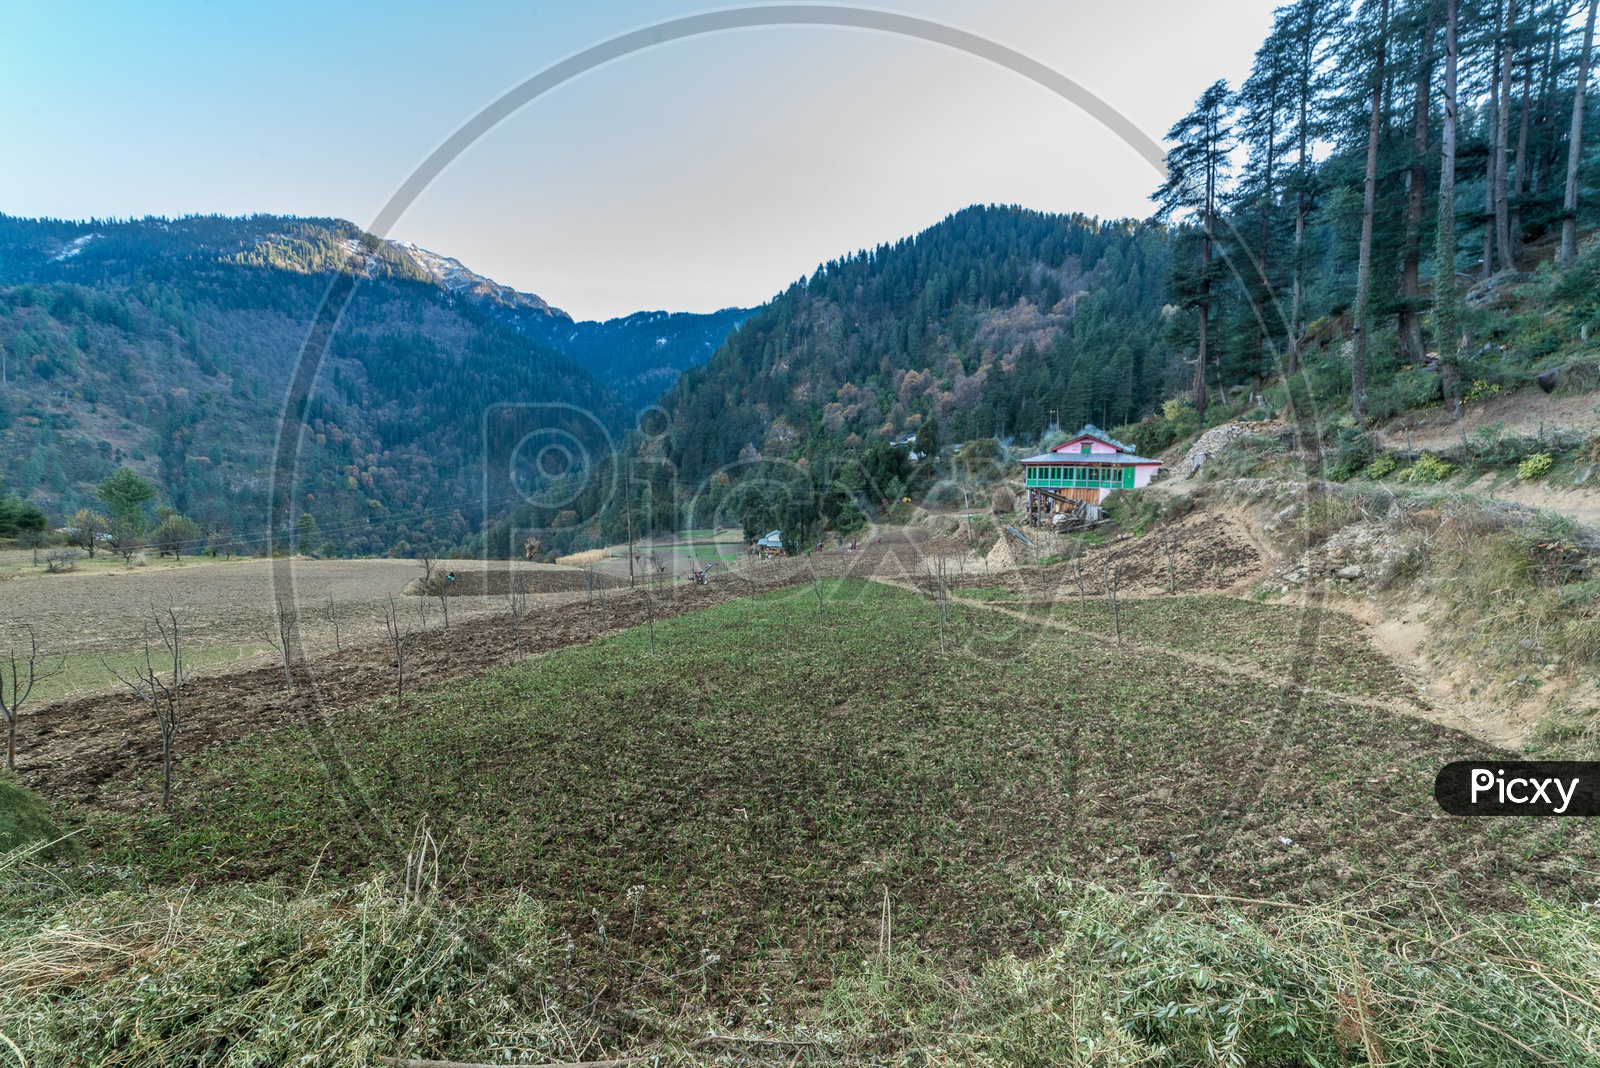 A view of an empty field surrounded by deodar trees in Manali